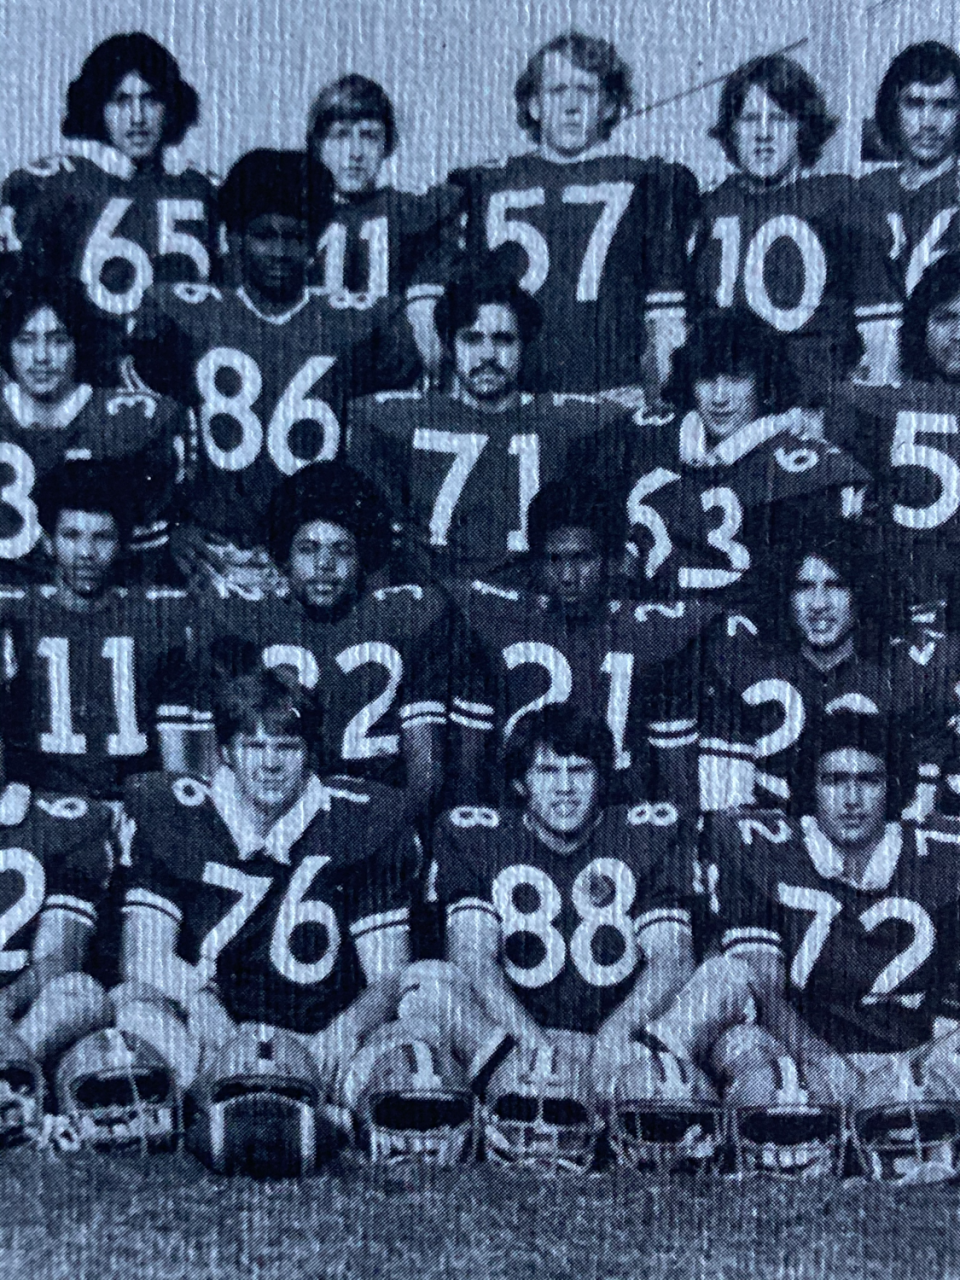 High school football players in uniform stand in rows.